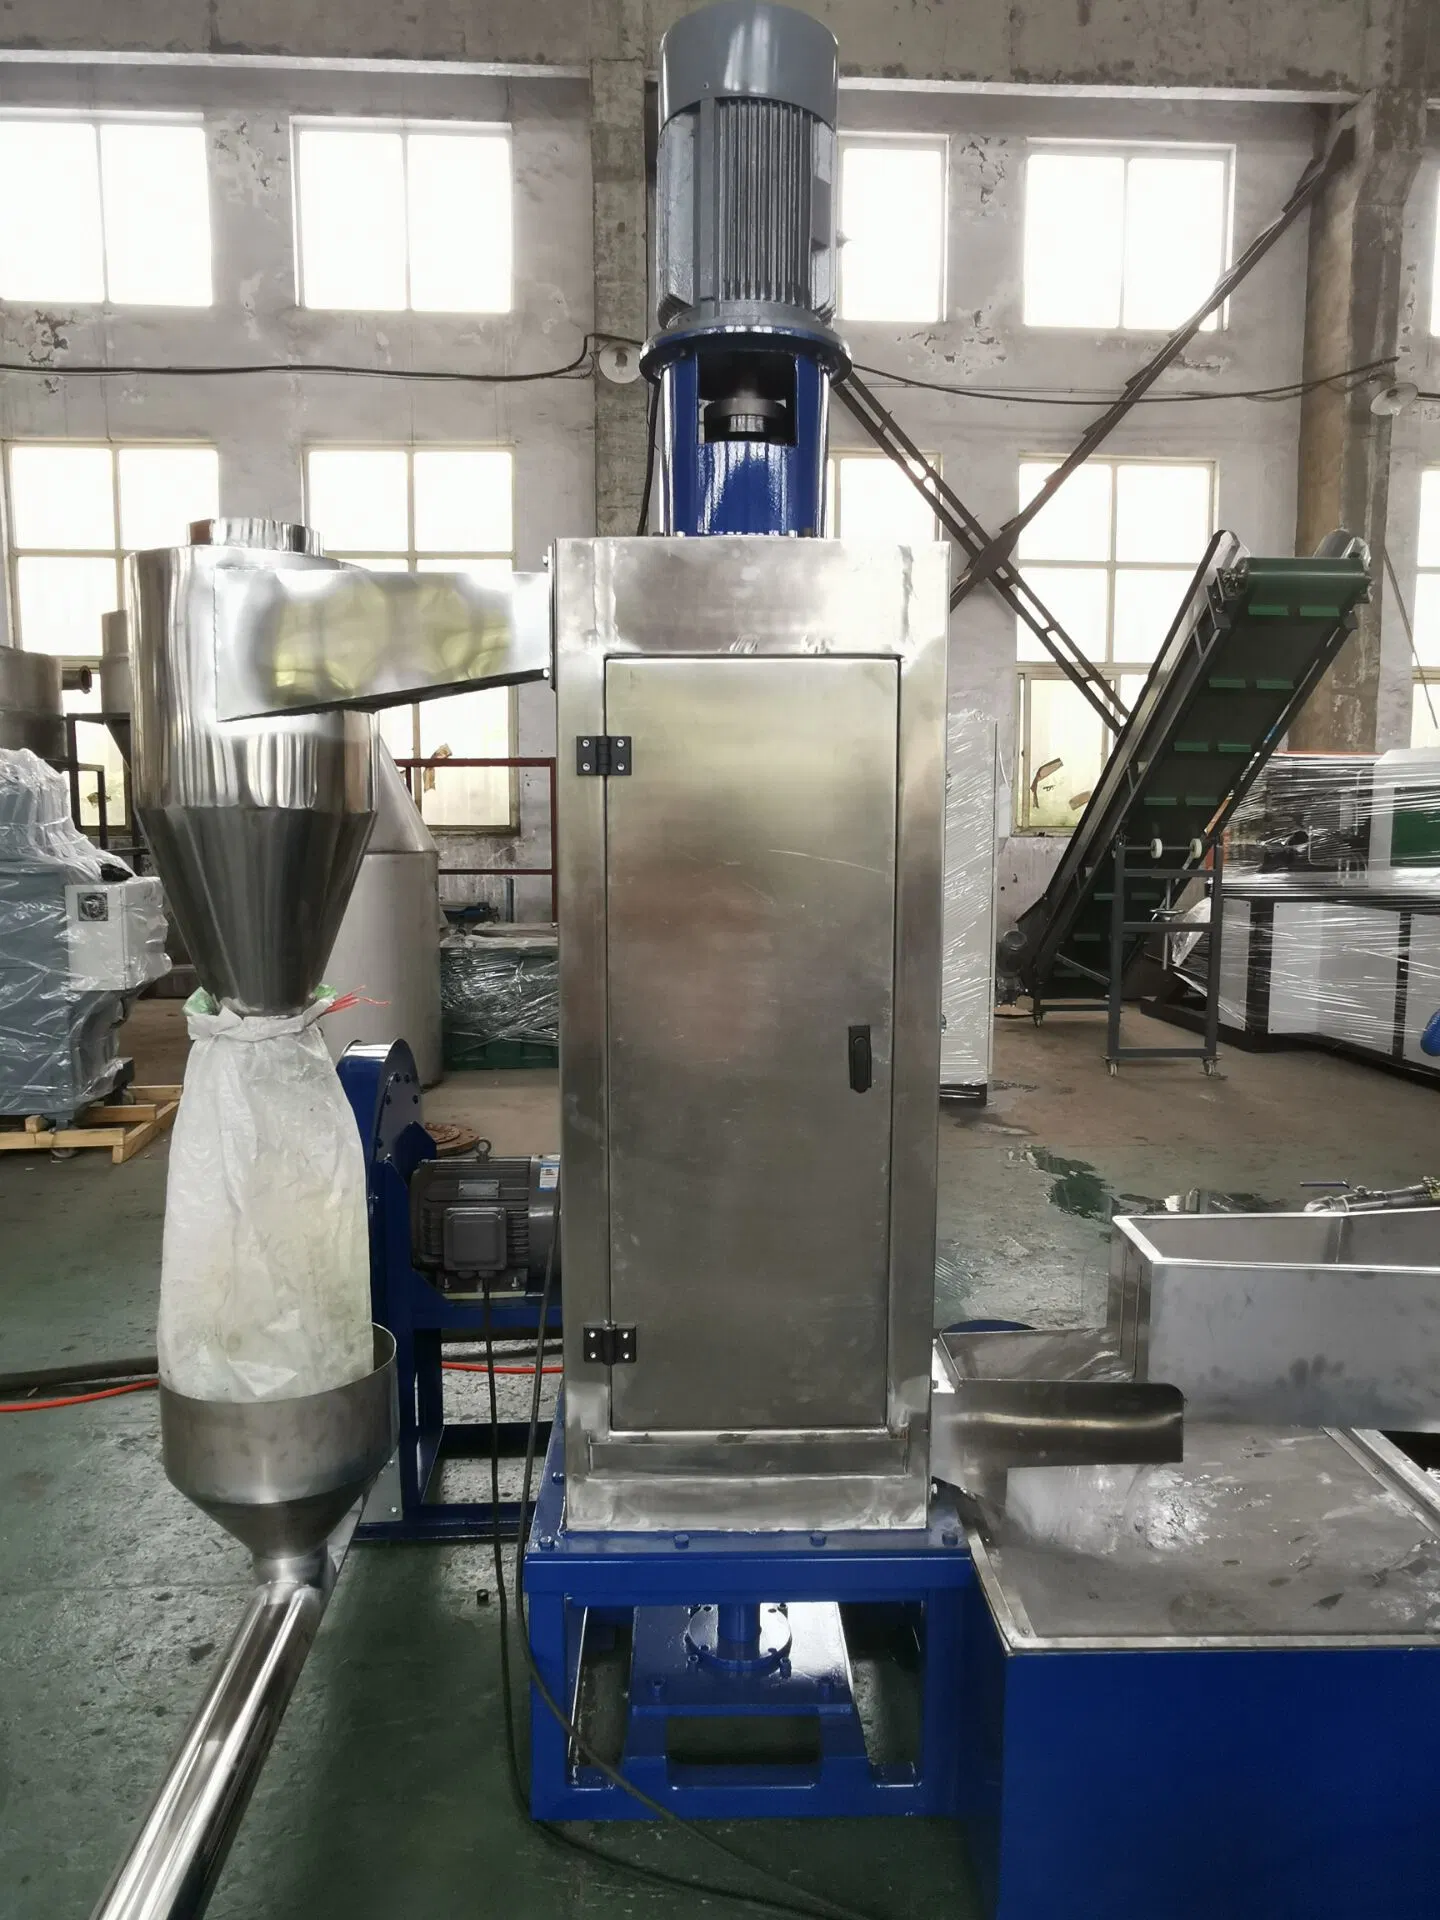 PP Polypropylene Woven Bags Packaging Boxes Basket Flakes Suqeezing Pellets Pelletizing Pelletizer Extruding Extruders Extrusion Machine for Sell